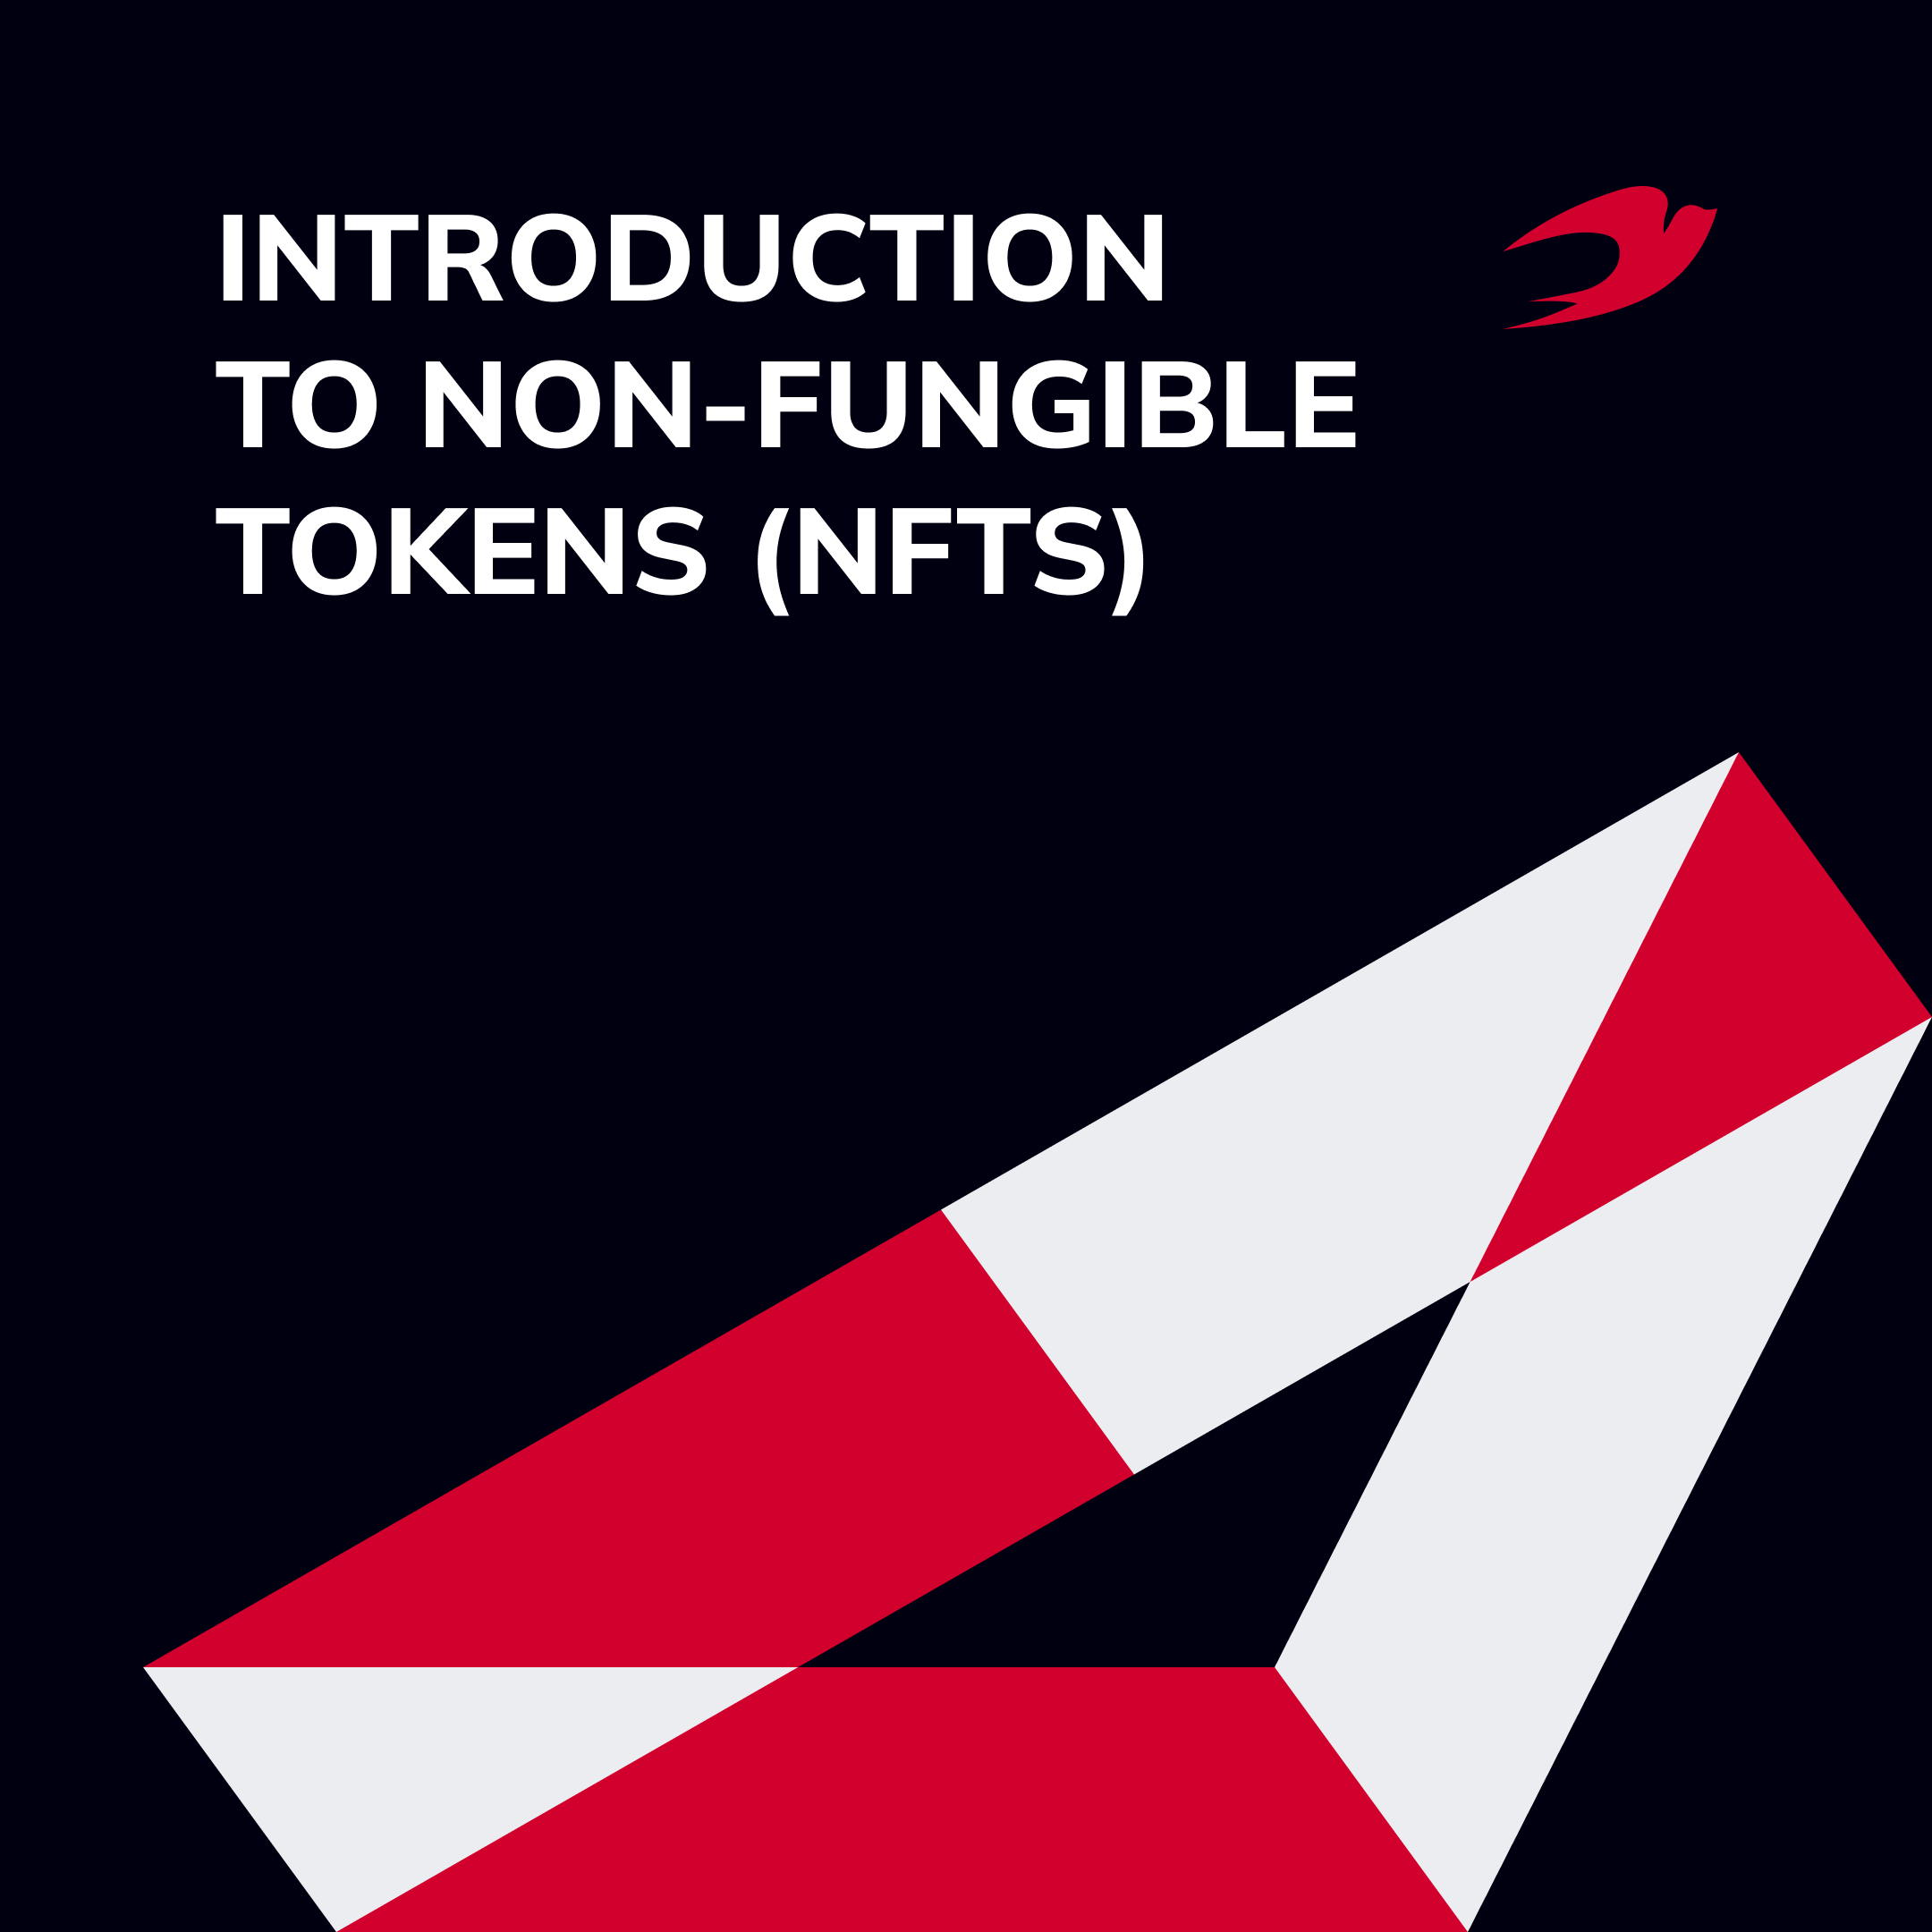 Introduction to Non-Fungible Tokens (NFTs)